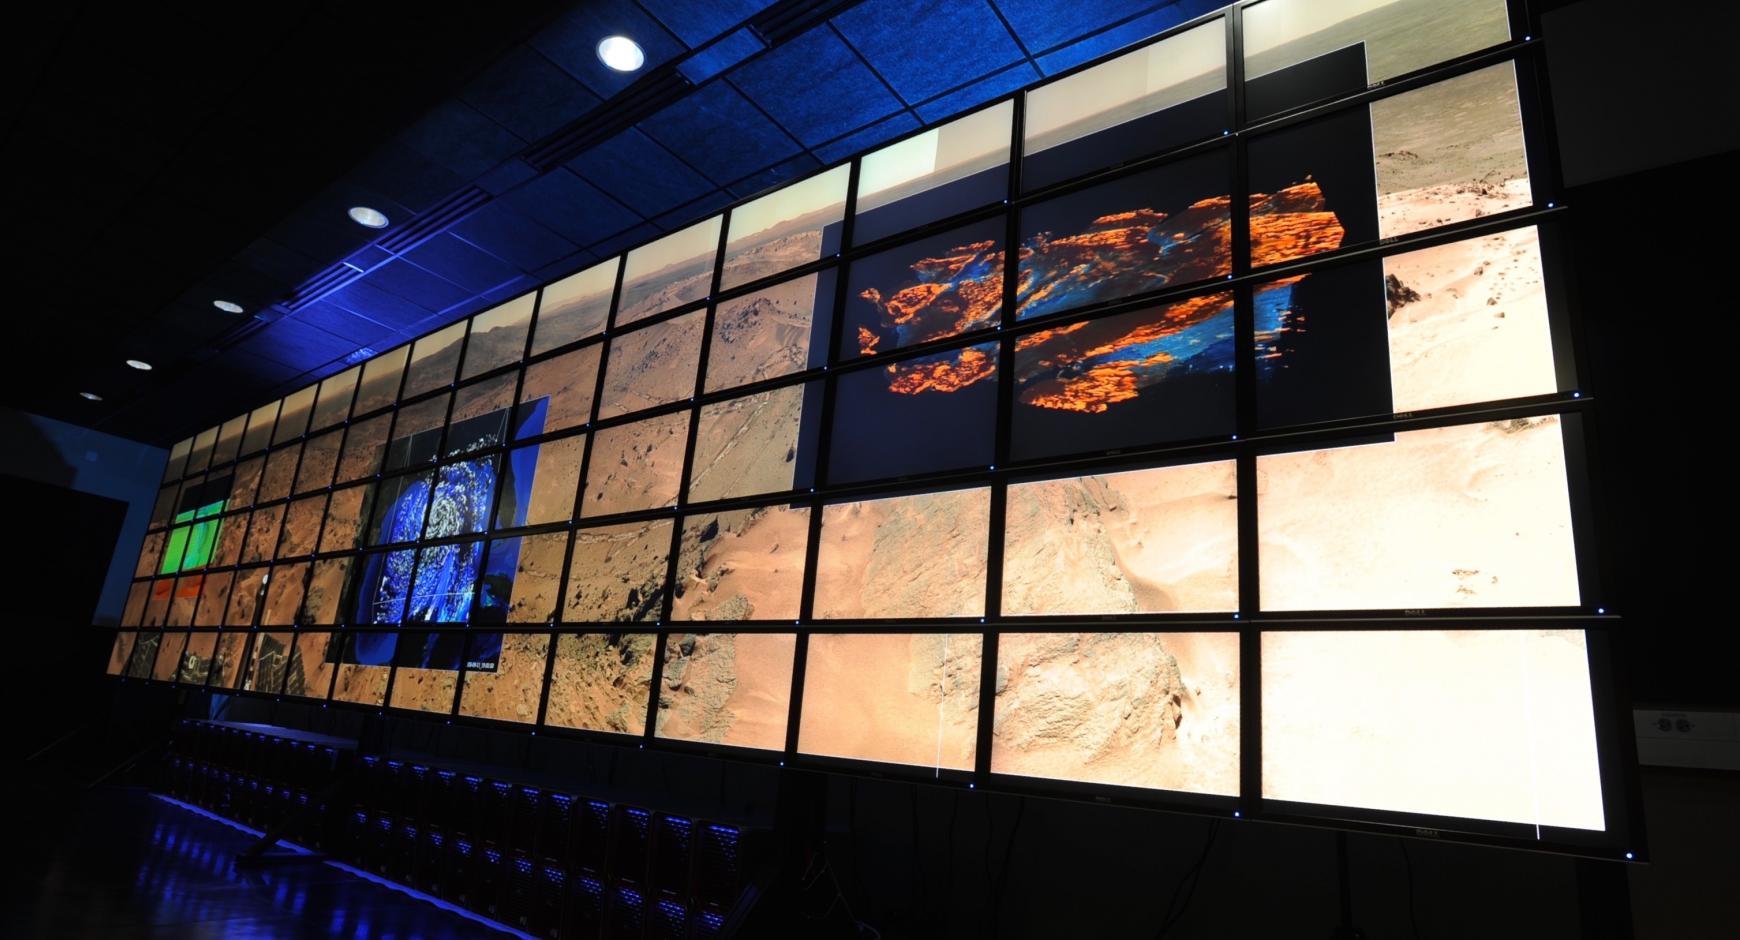 Large visualization screen used to explore and present scientific data.